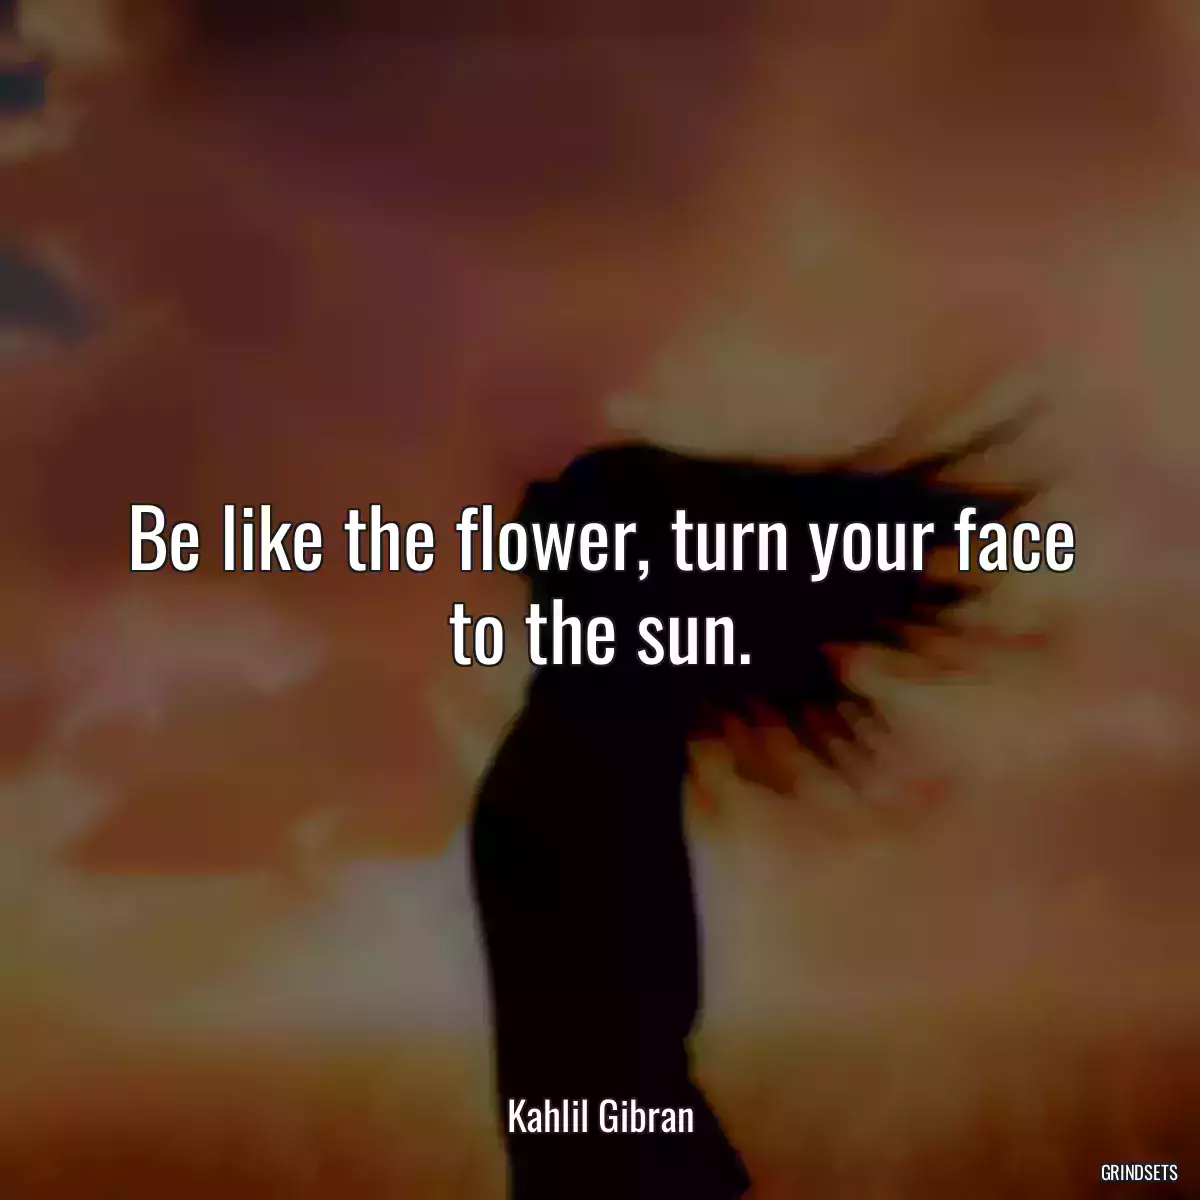 Be like the flower, turn your face to the sun.